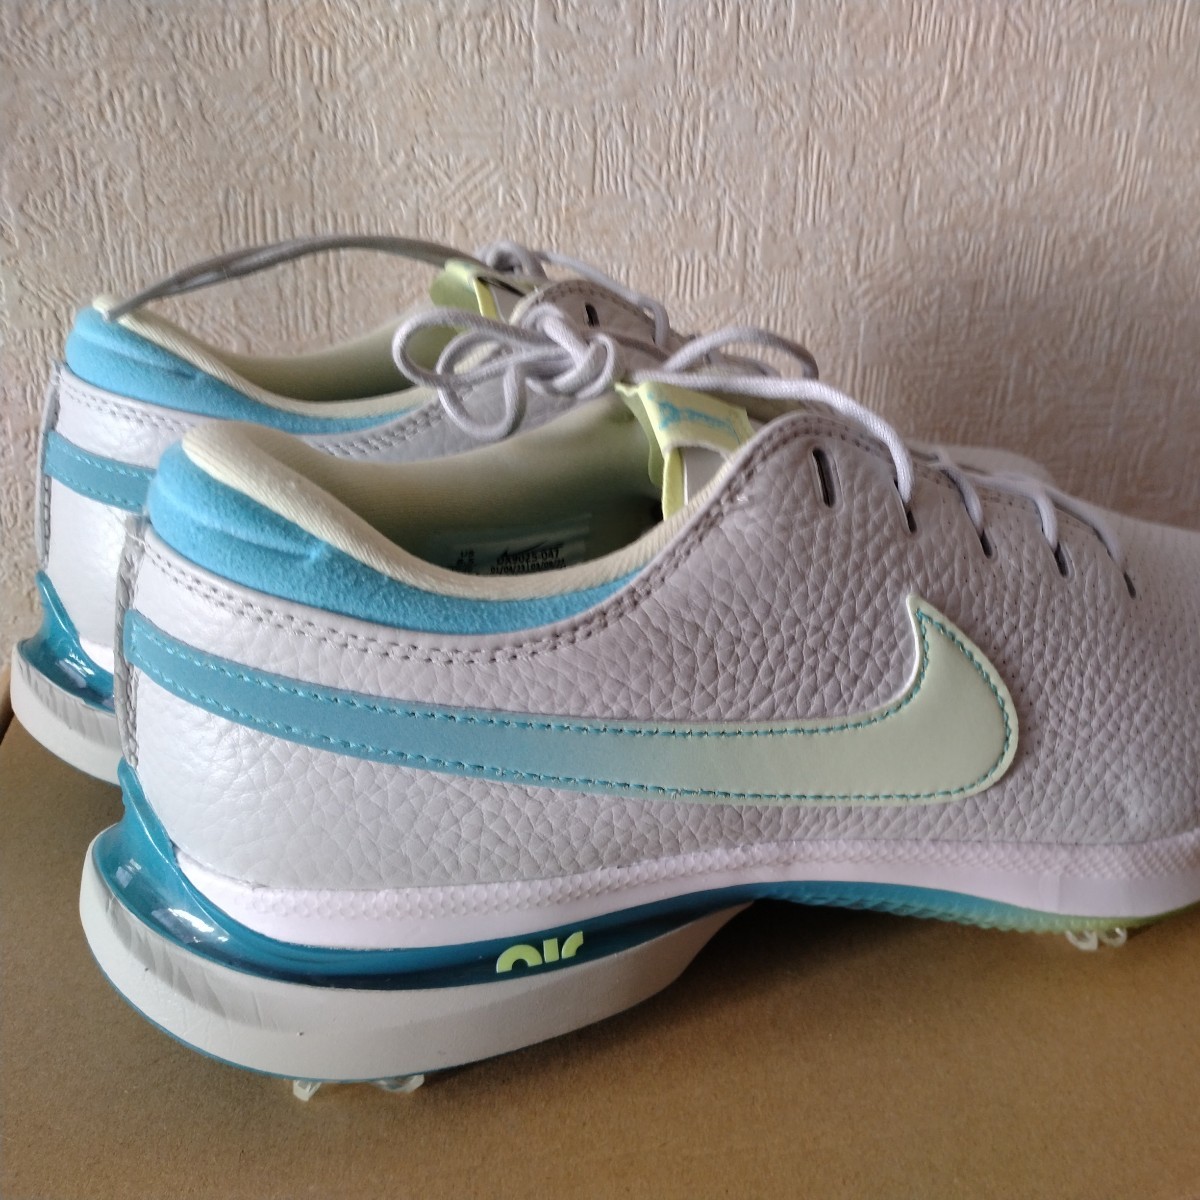 * new goods Japan regular goods * Nike air zoom Victory Tour 3 * golf shoes ( wide )26.5.* Pro use model 